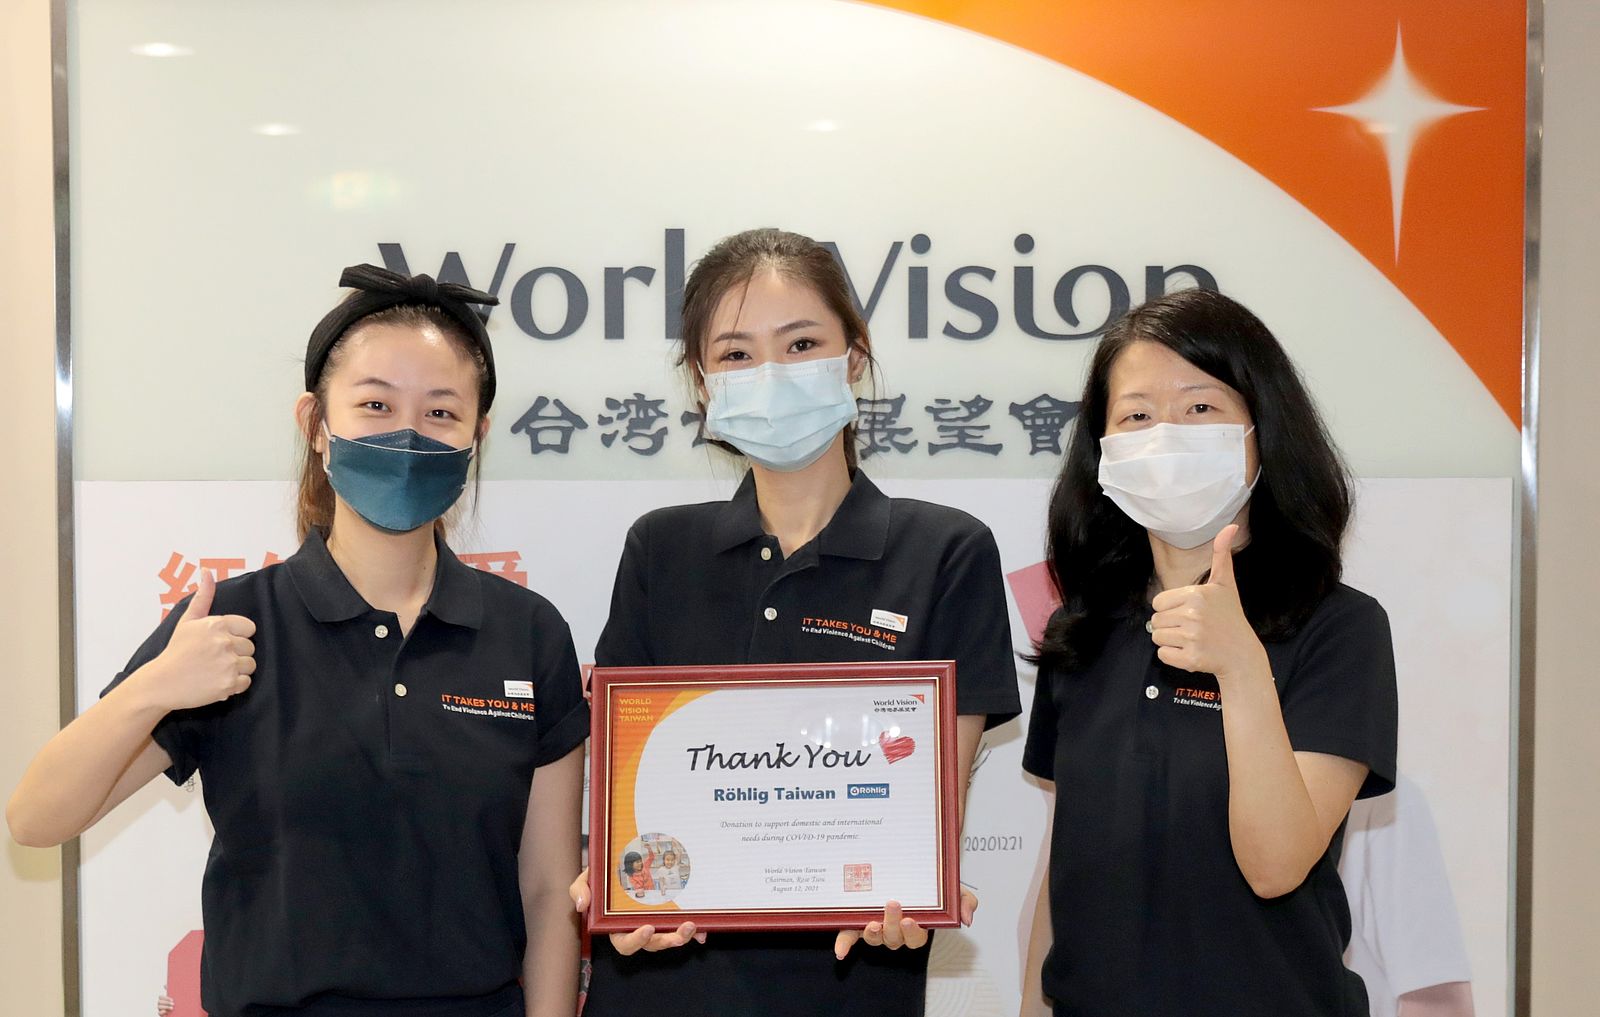 Three representatives hold Rohlig Taiwan donation certificate in front of World Vision logo. 